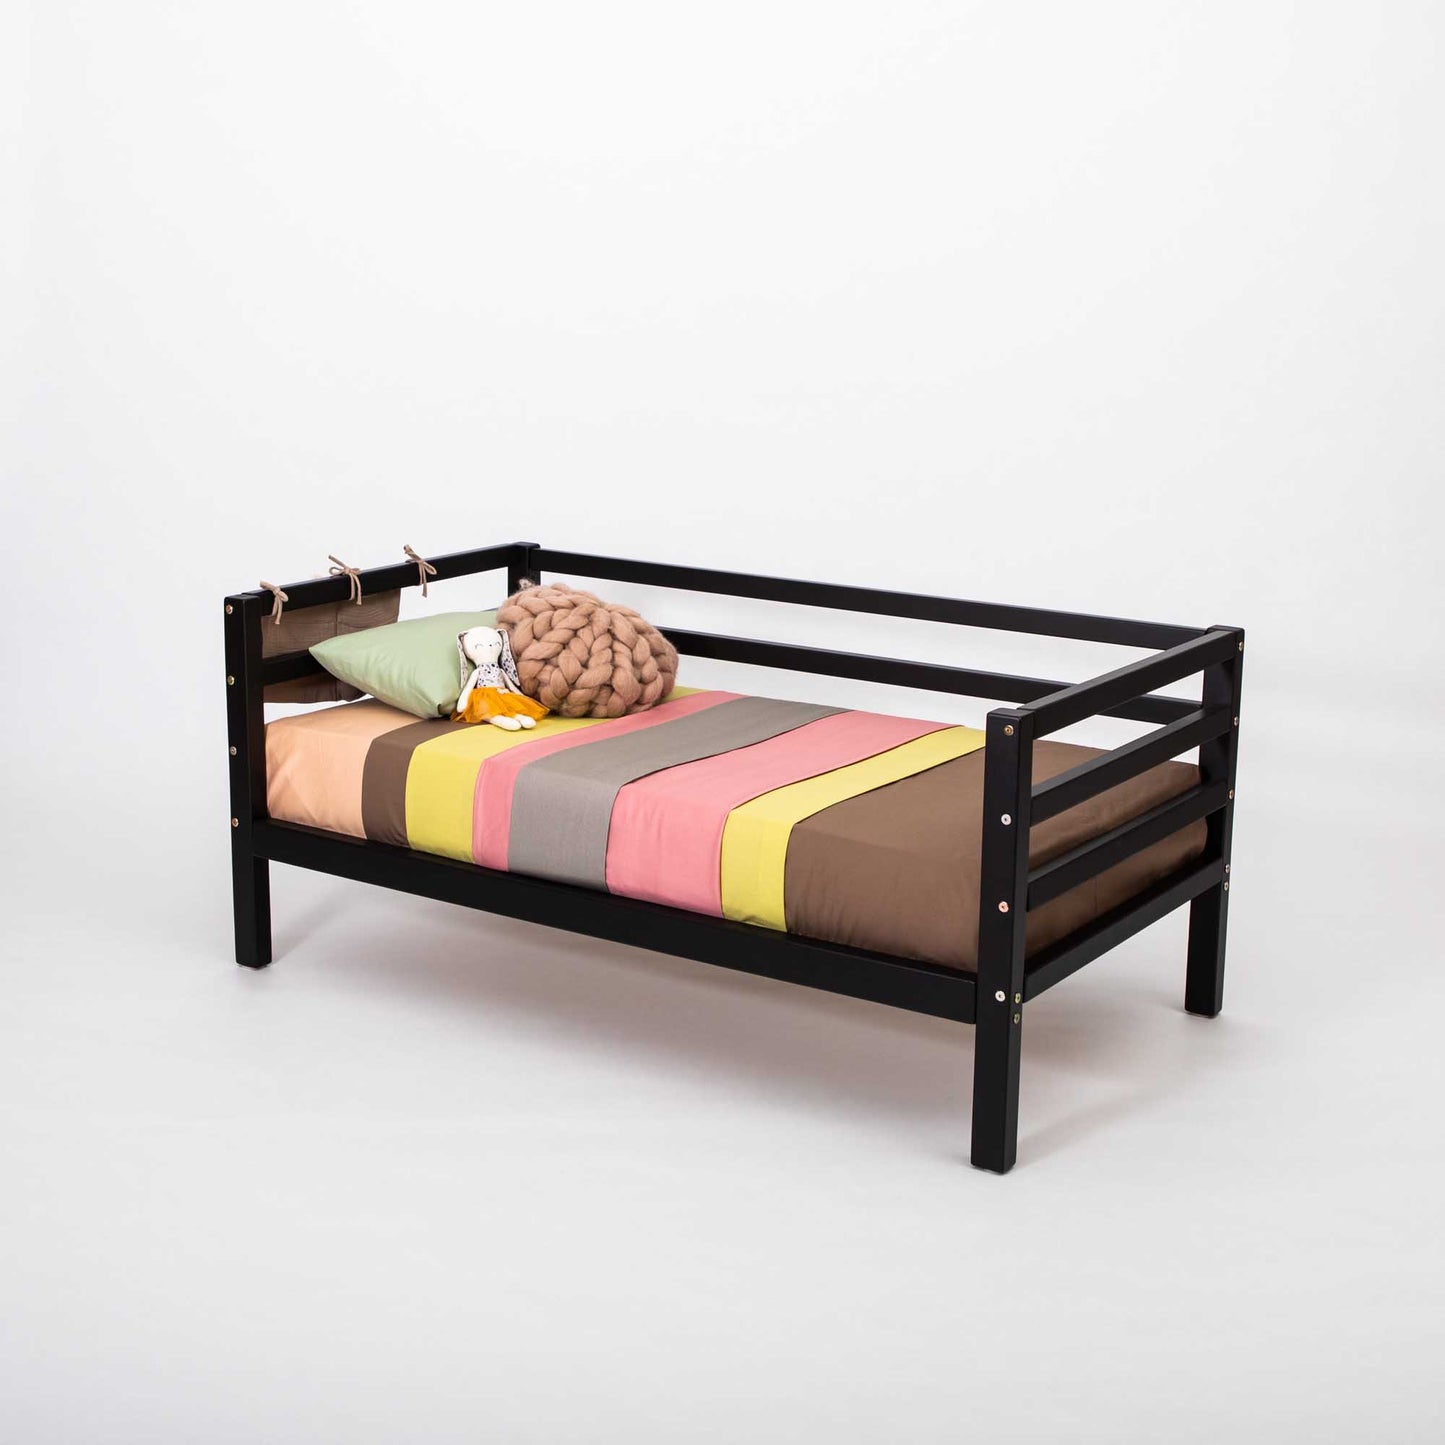 A Sweet Home From Wood Kids' bed on legs with a 3-sided horizontal rail, designed to grow with your child.